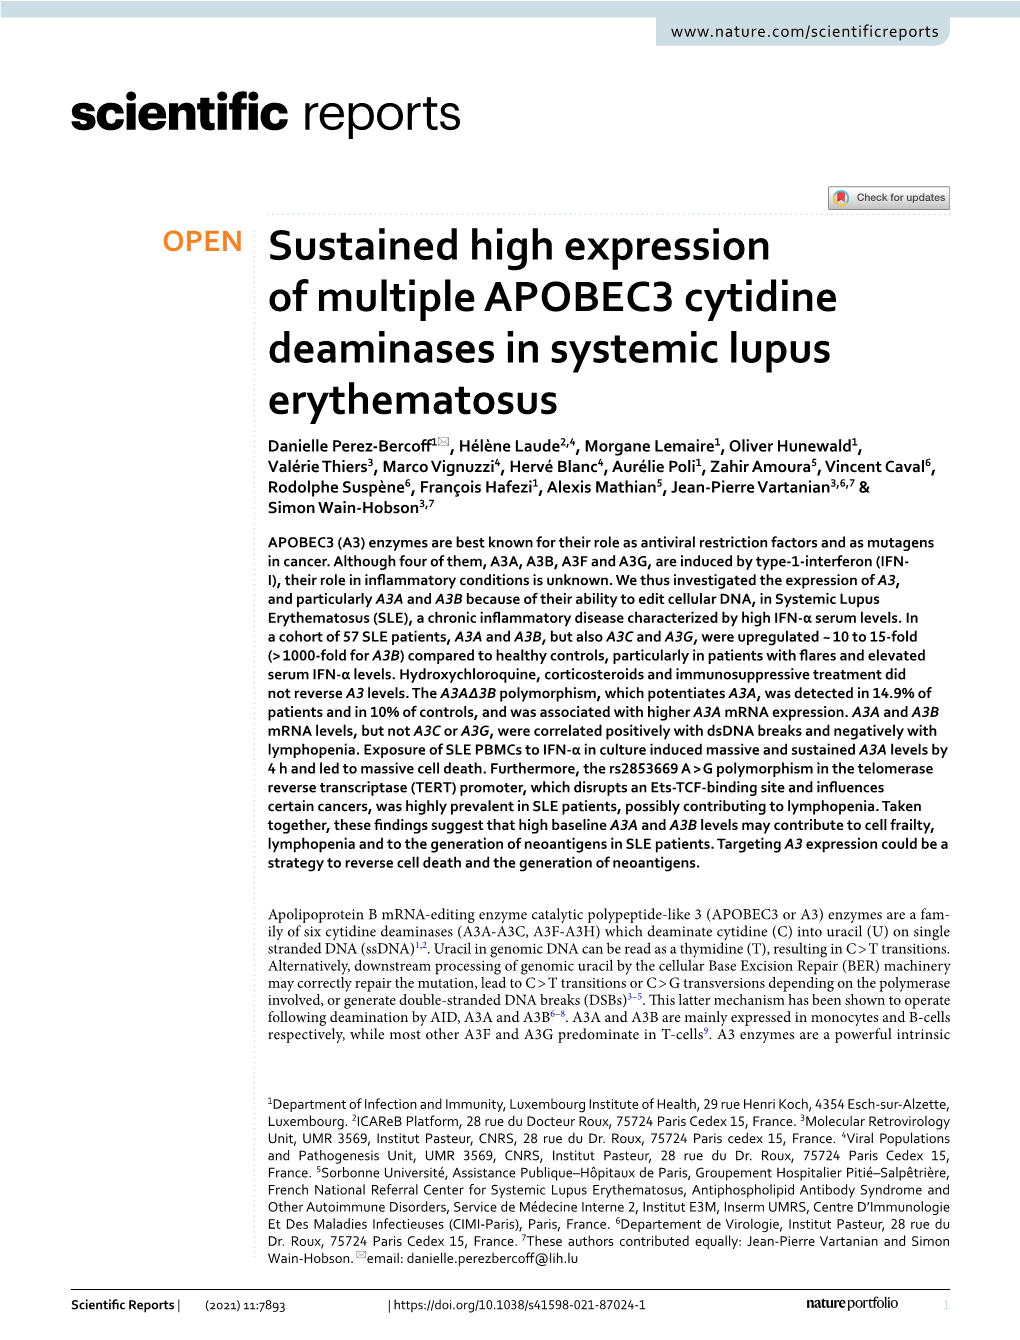 Sustained High Expression of Multiple APOBEC3 Cytidine Deaminases In